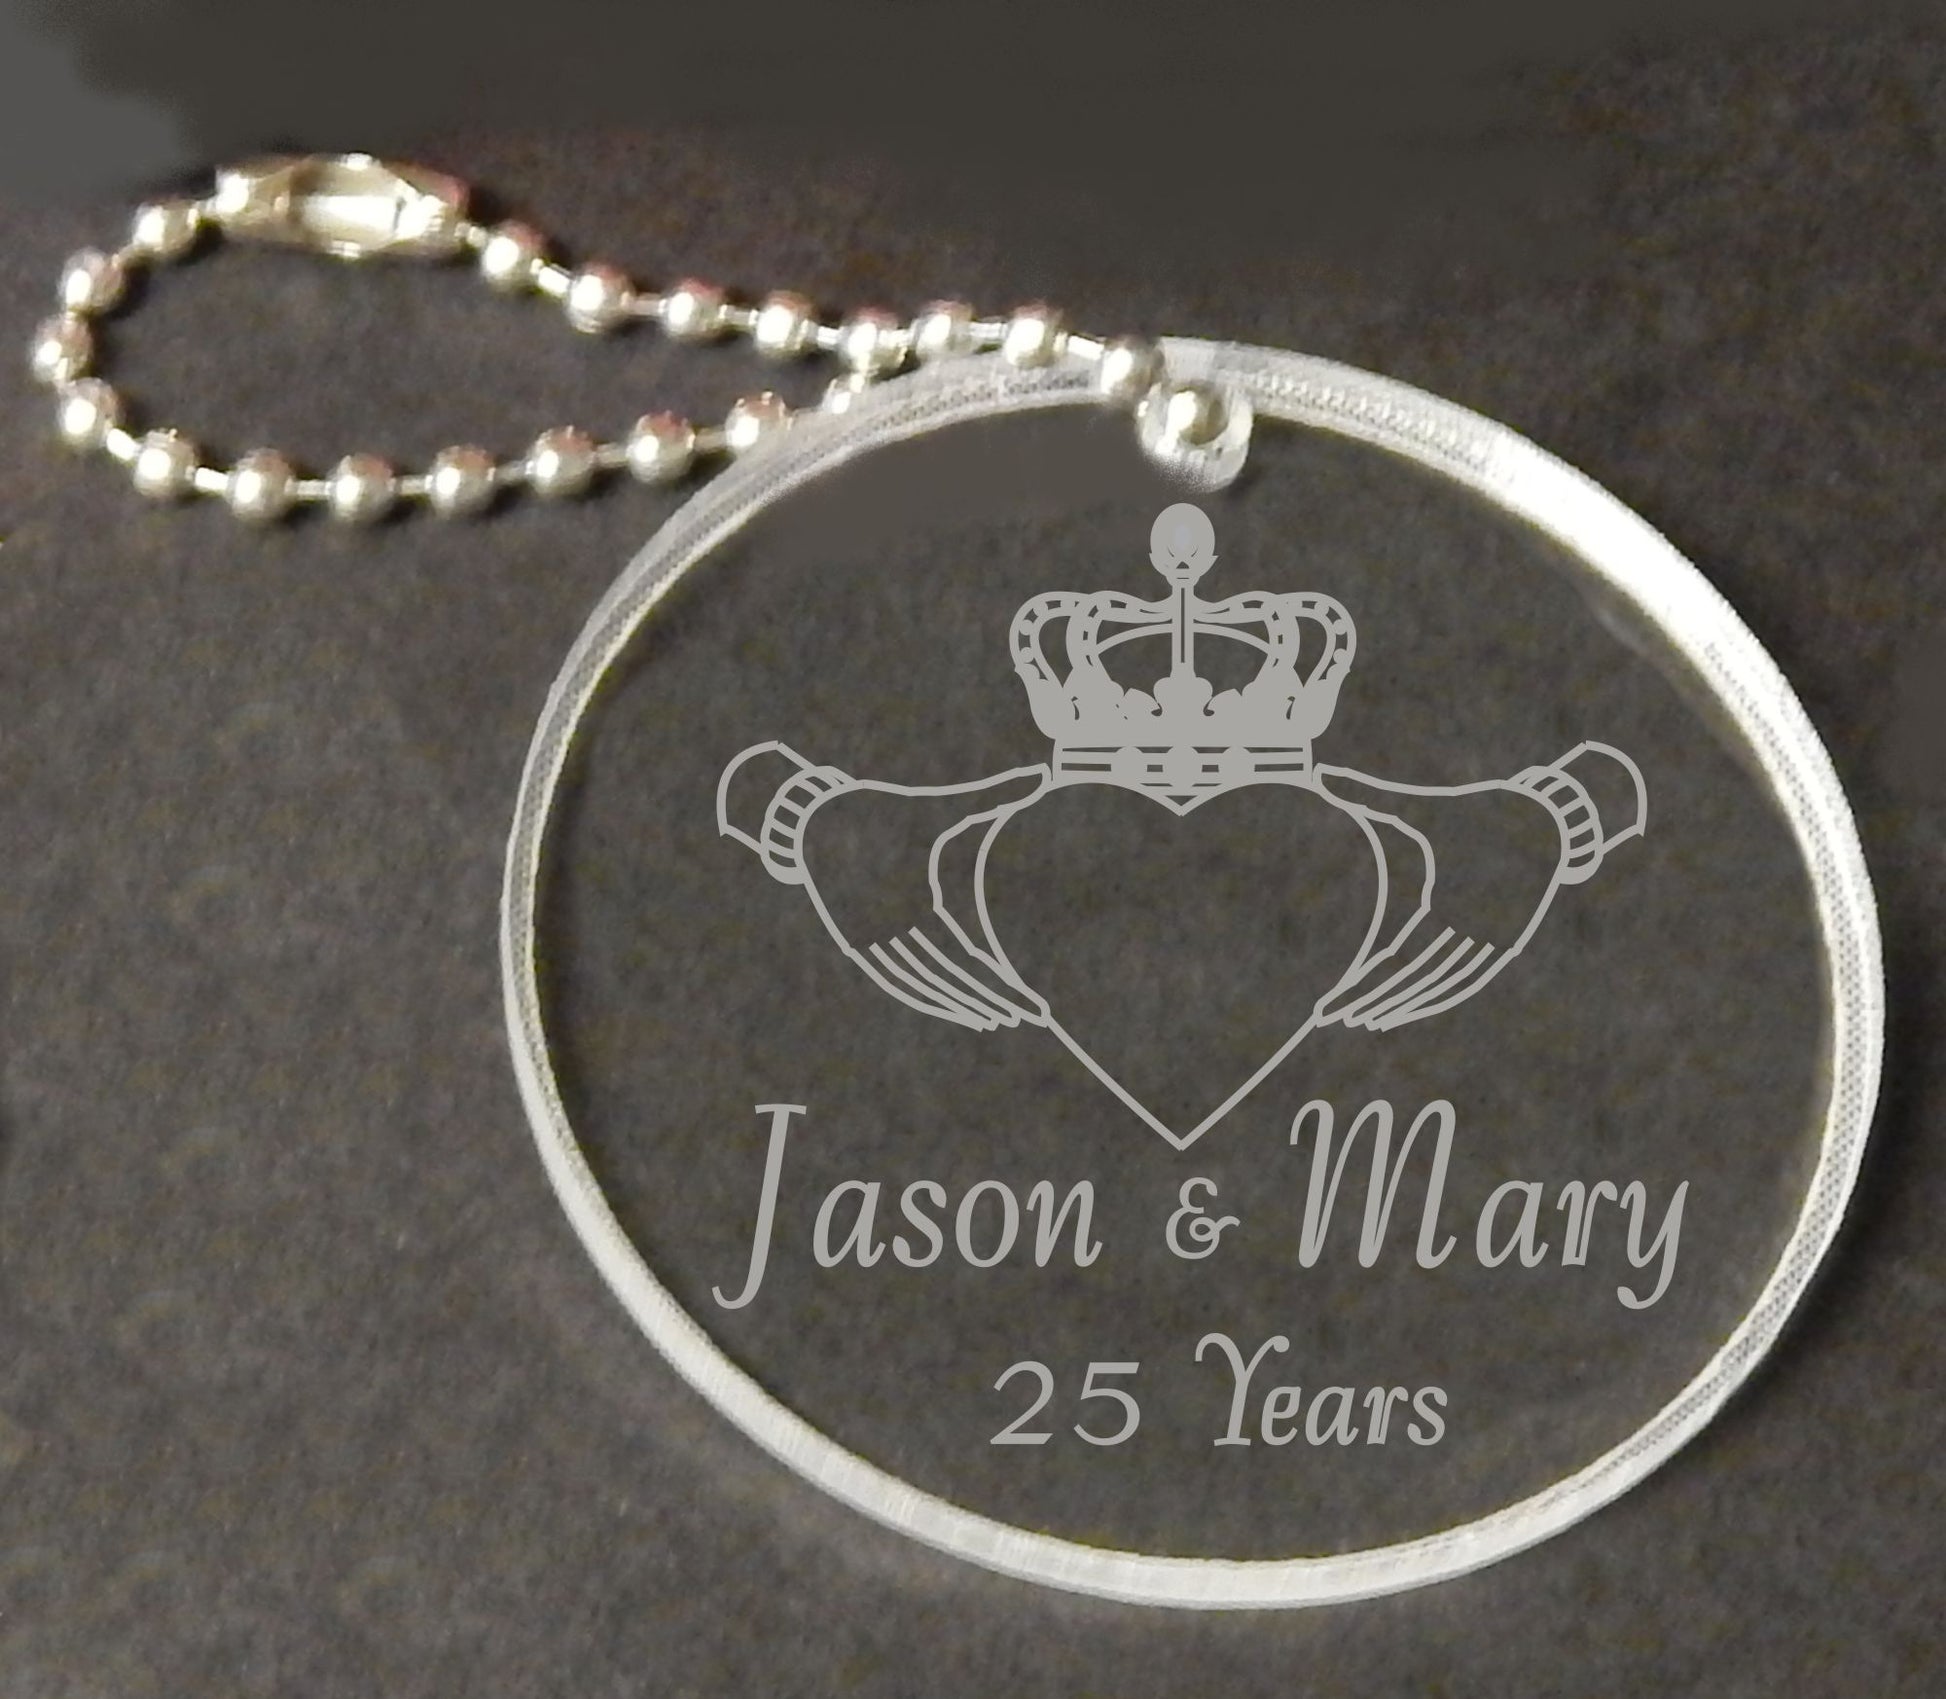 round acrylic keychain designed with a claddagh along with names and number of years for anniversary, attached to a small metal chain